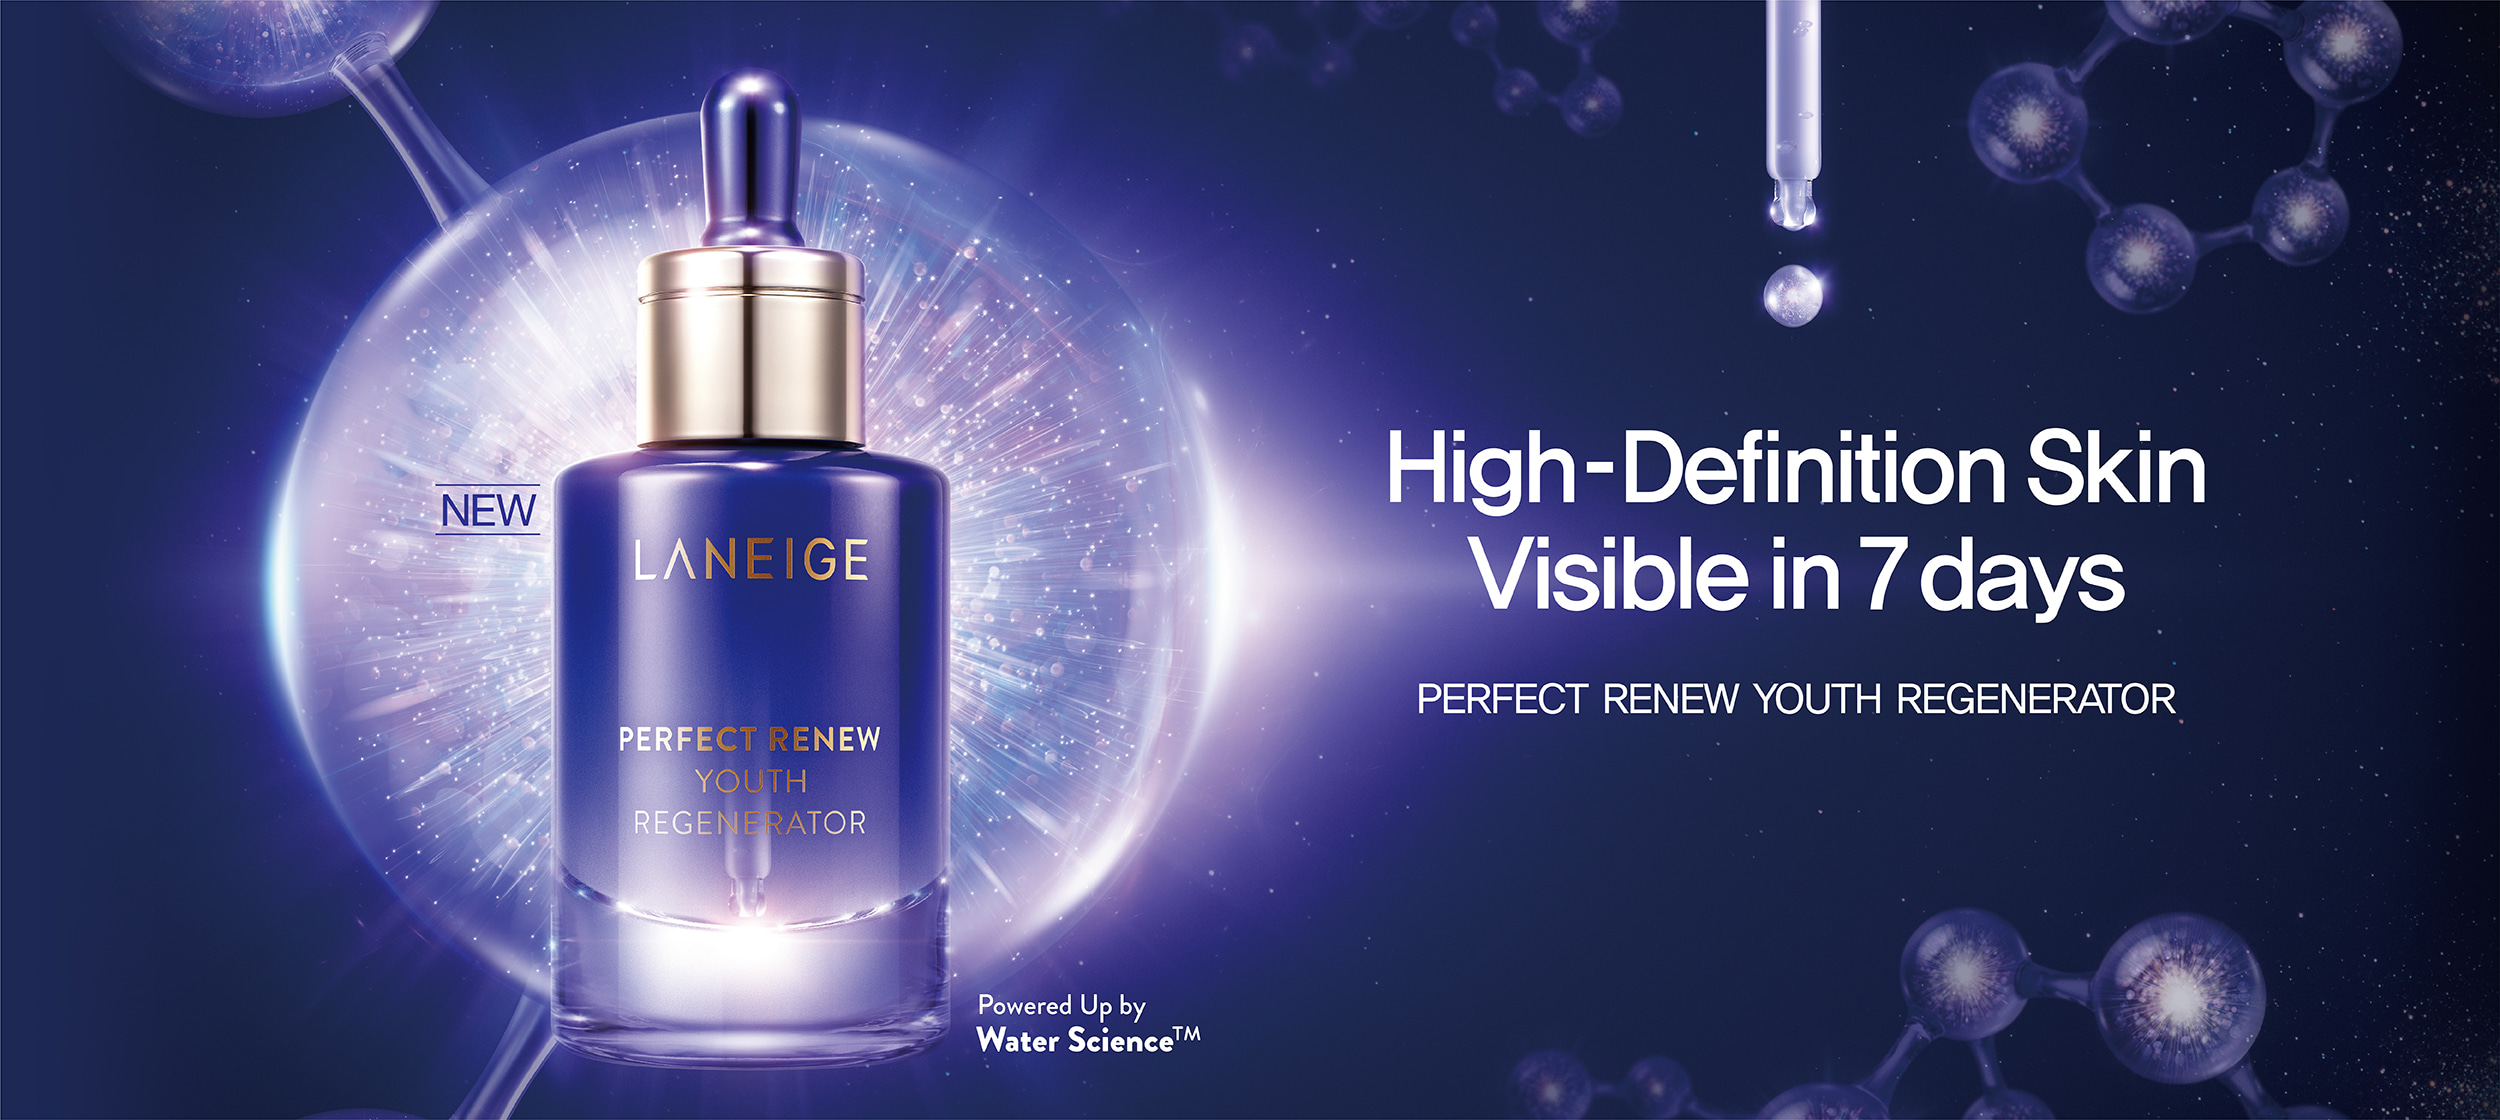 High-Definition Skin Visible in 7 days Wrinkles·Elasticity·Radiance·Moisture·Texture Perfect renew youth regenerator